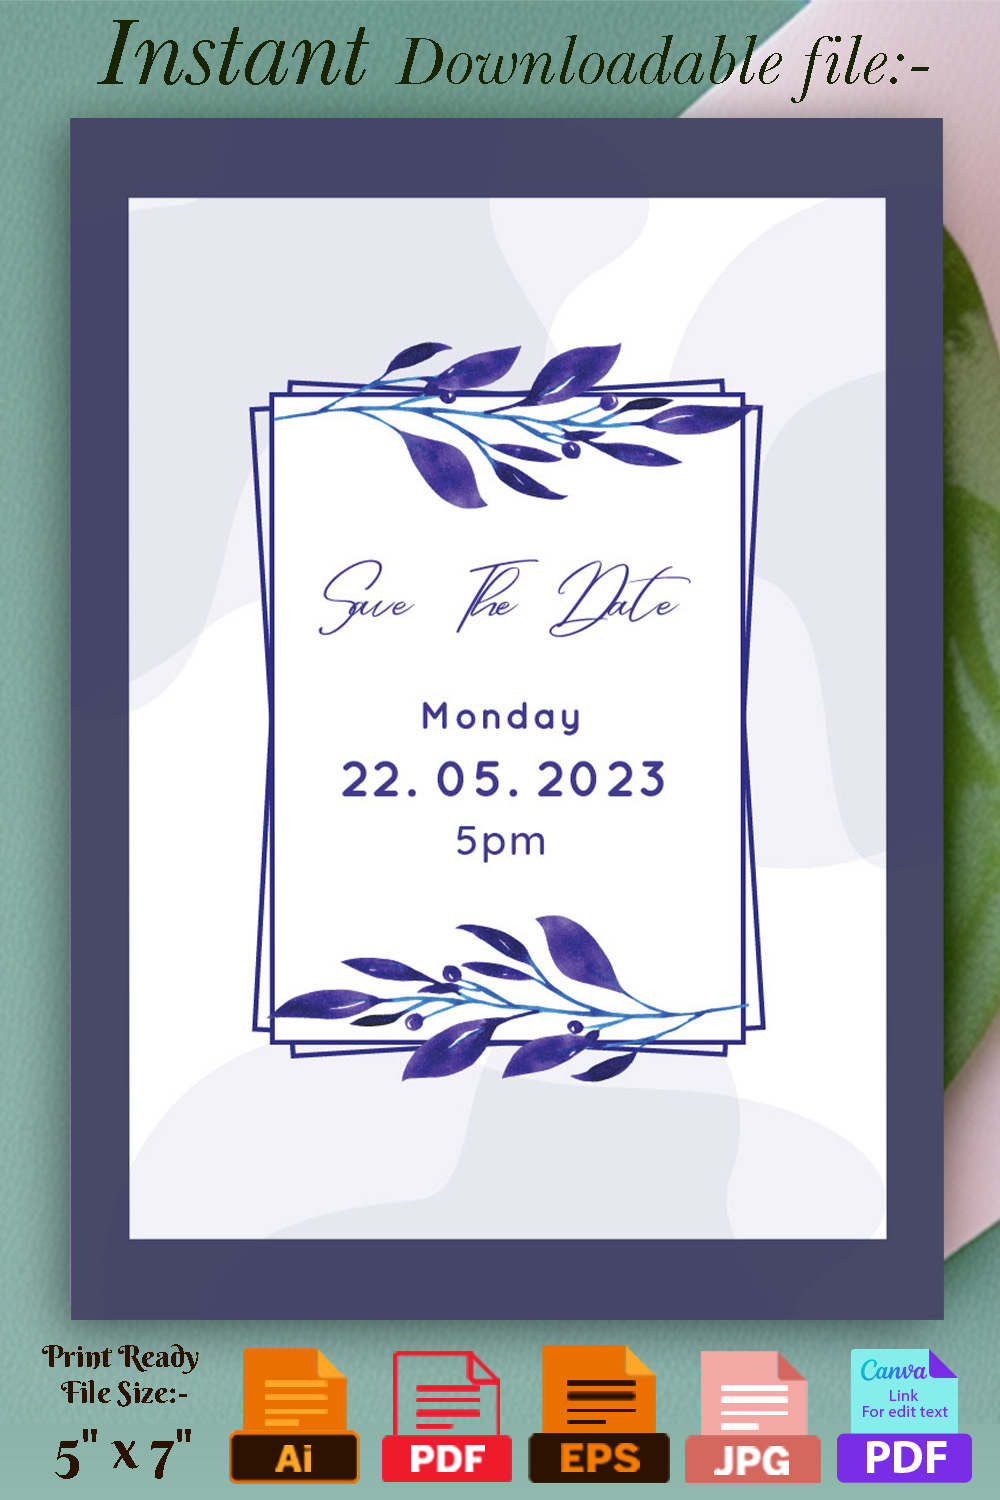 Image with exquisite wedding invitation in blue tones and leaves.